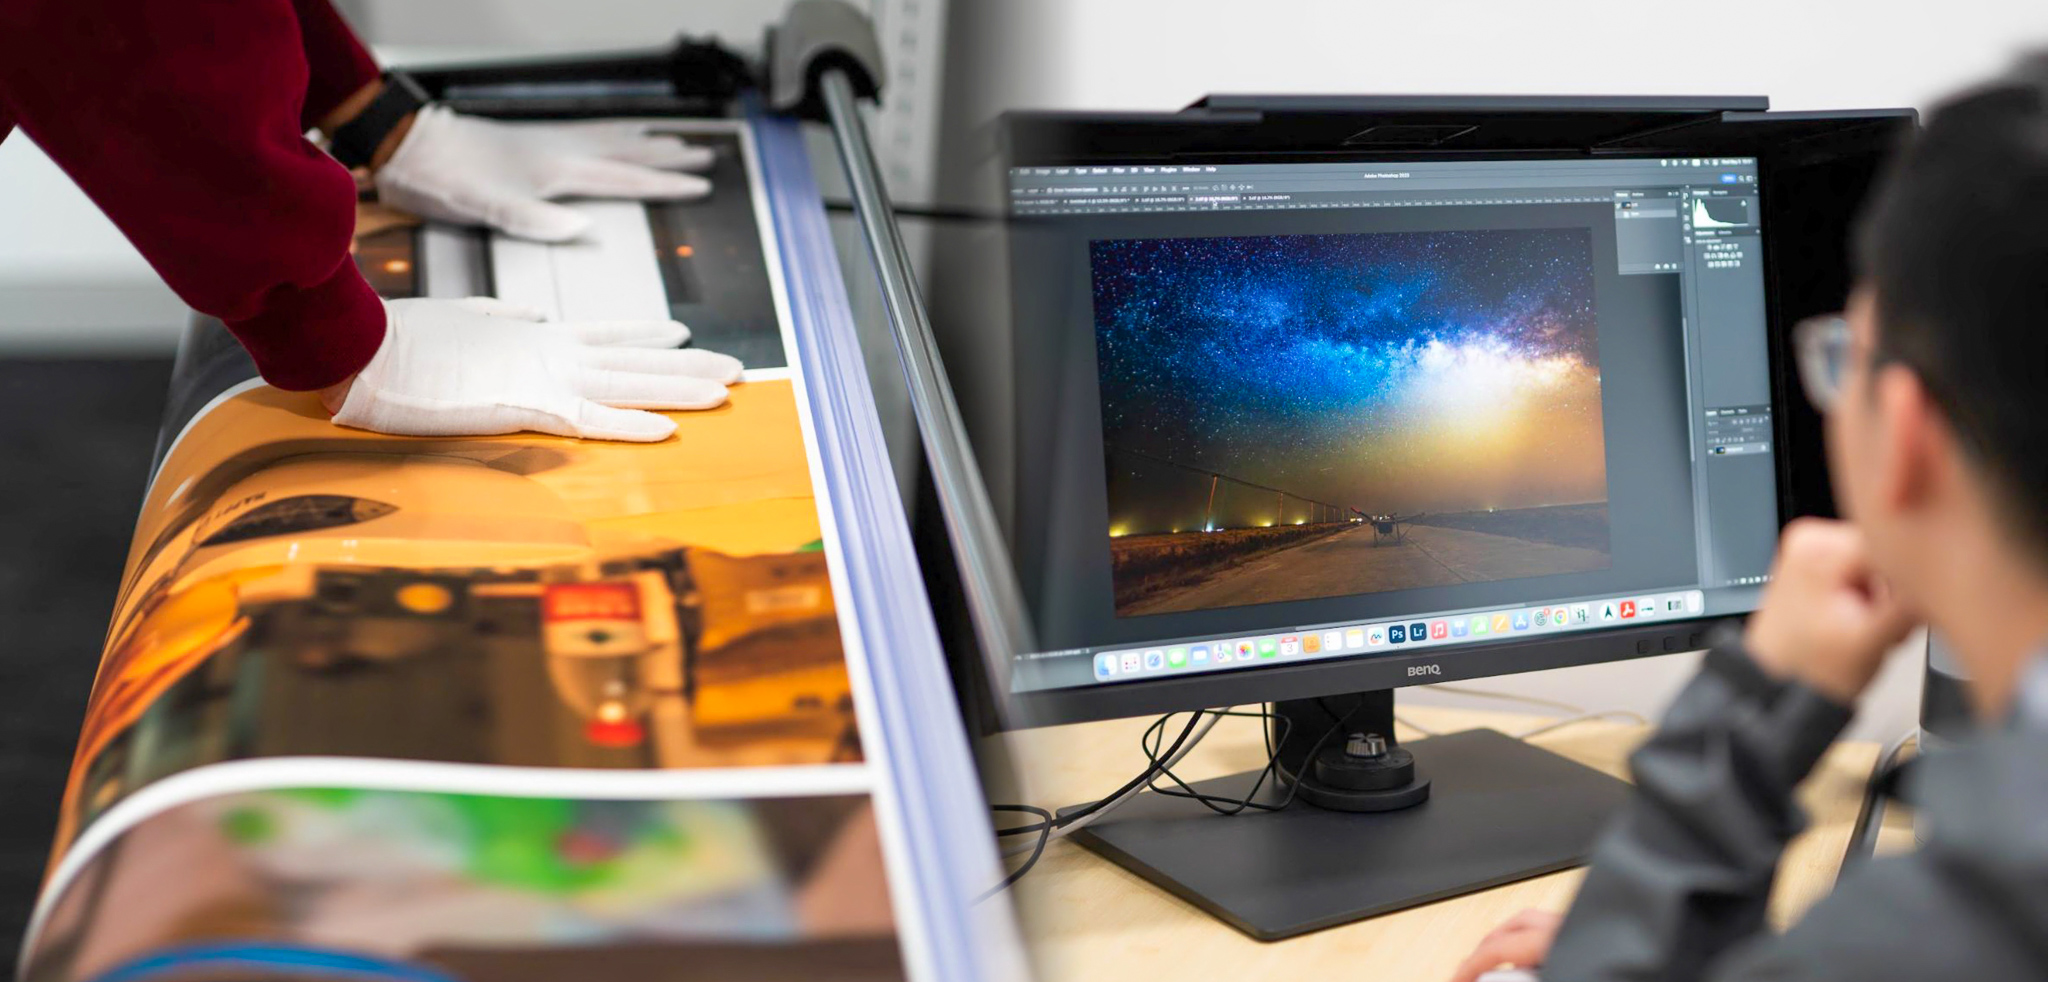 Left: Two gloved hands position a print in a cutting board. Right: A student edits a photo of a starry sky on a computer monitor.